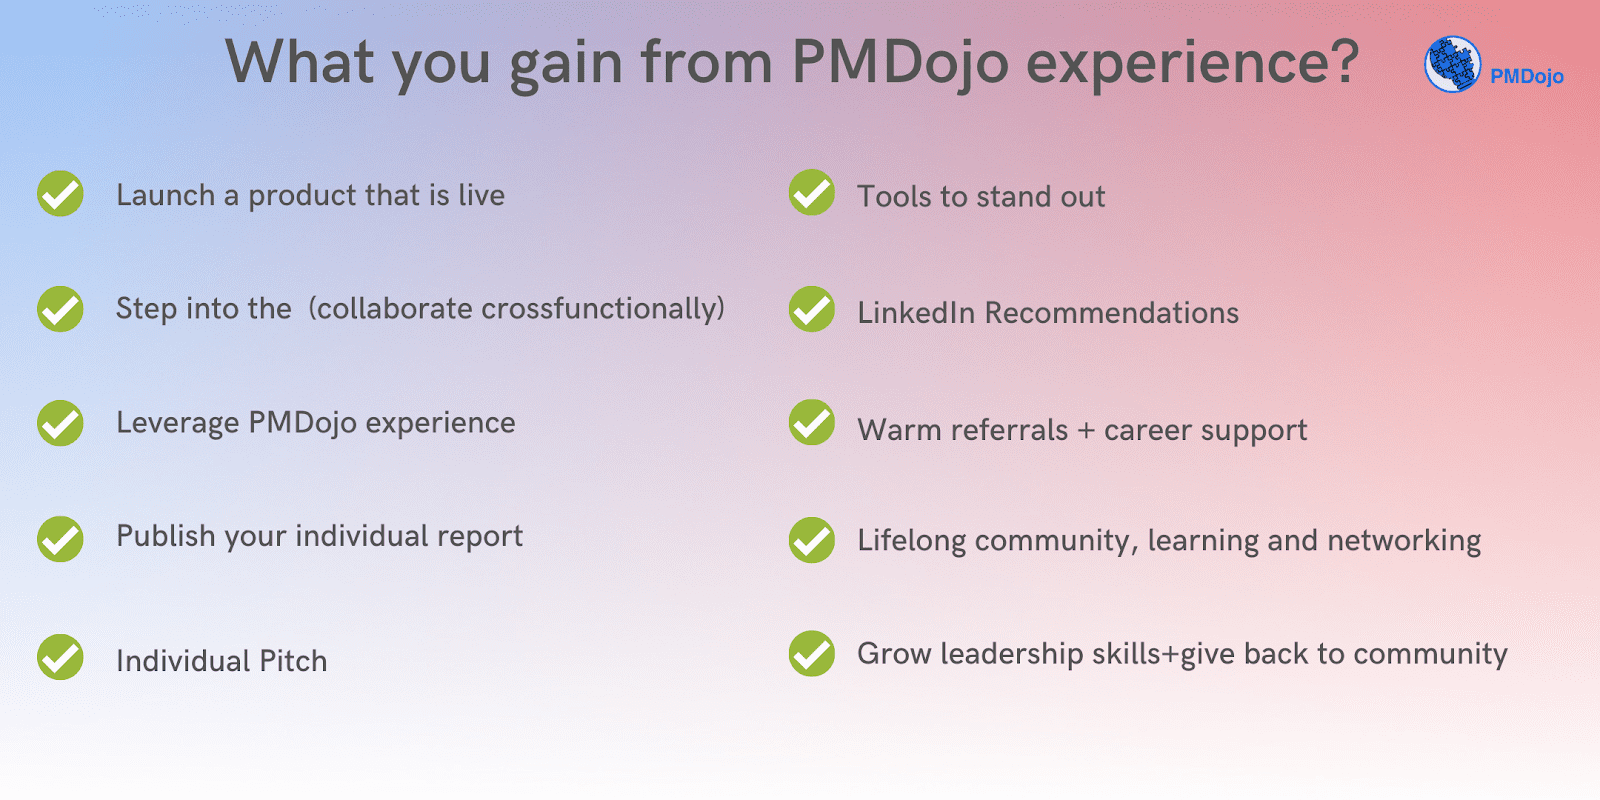 An infographic highlighting the benefits of learning product skills at PMDojo